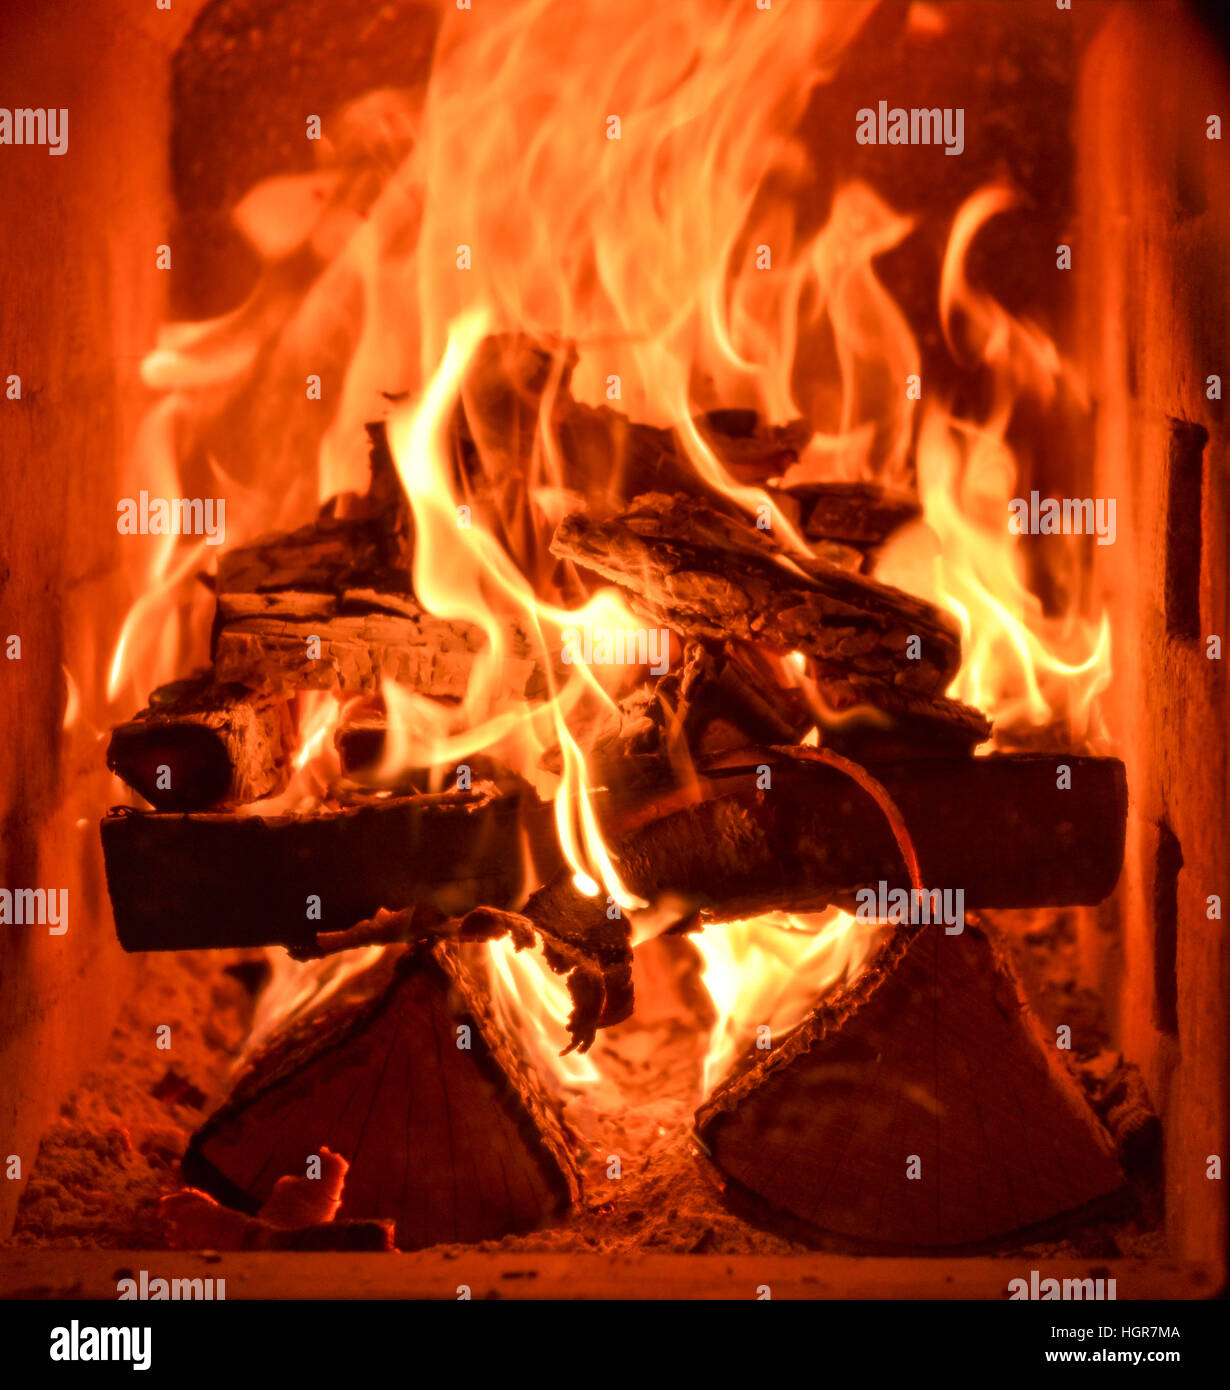 Closeup of the inside of home traditional fireplace running on natural hard wood with flames and heat. Stock Photo